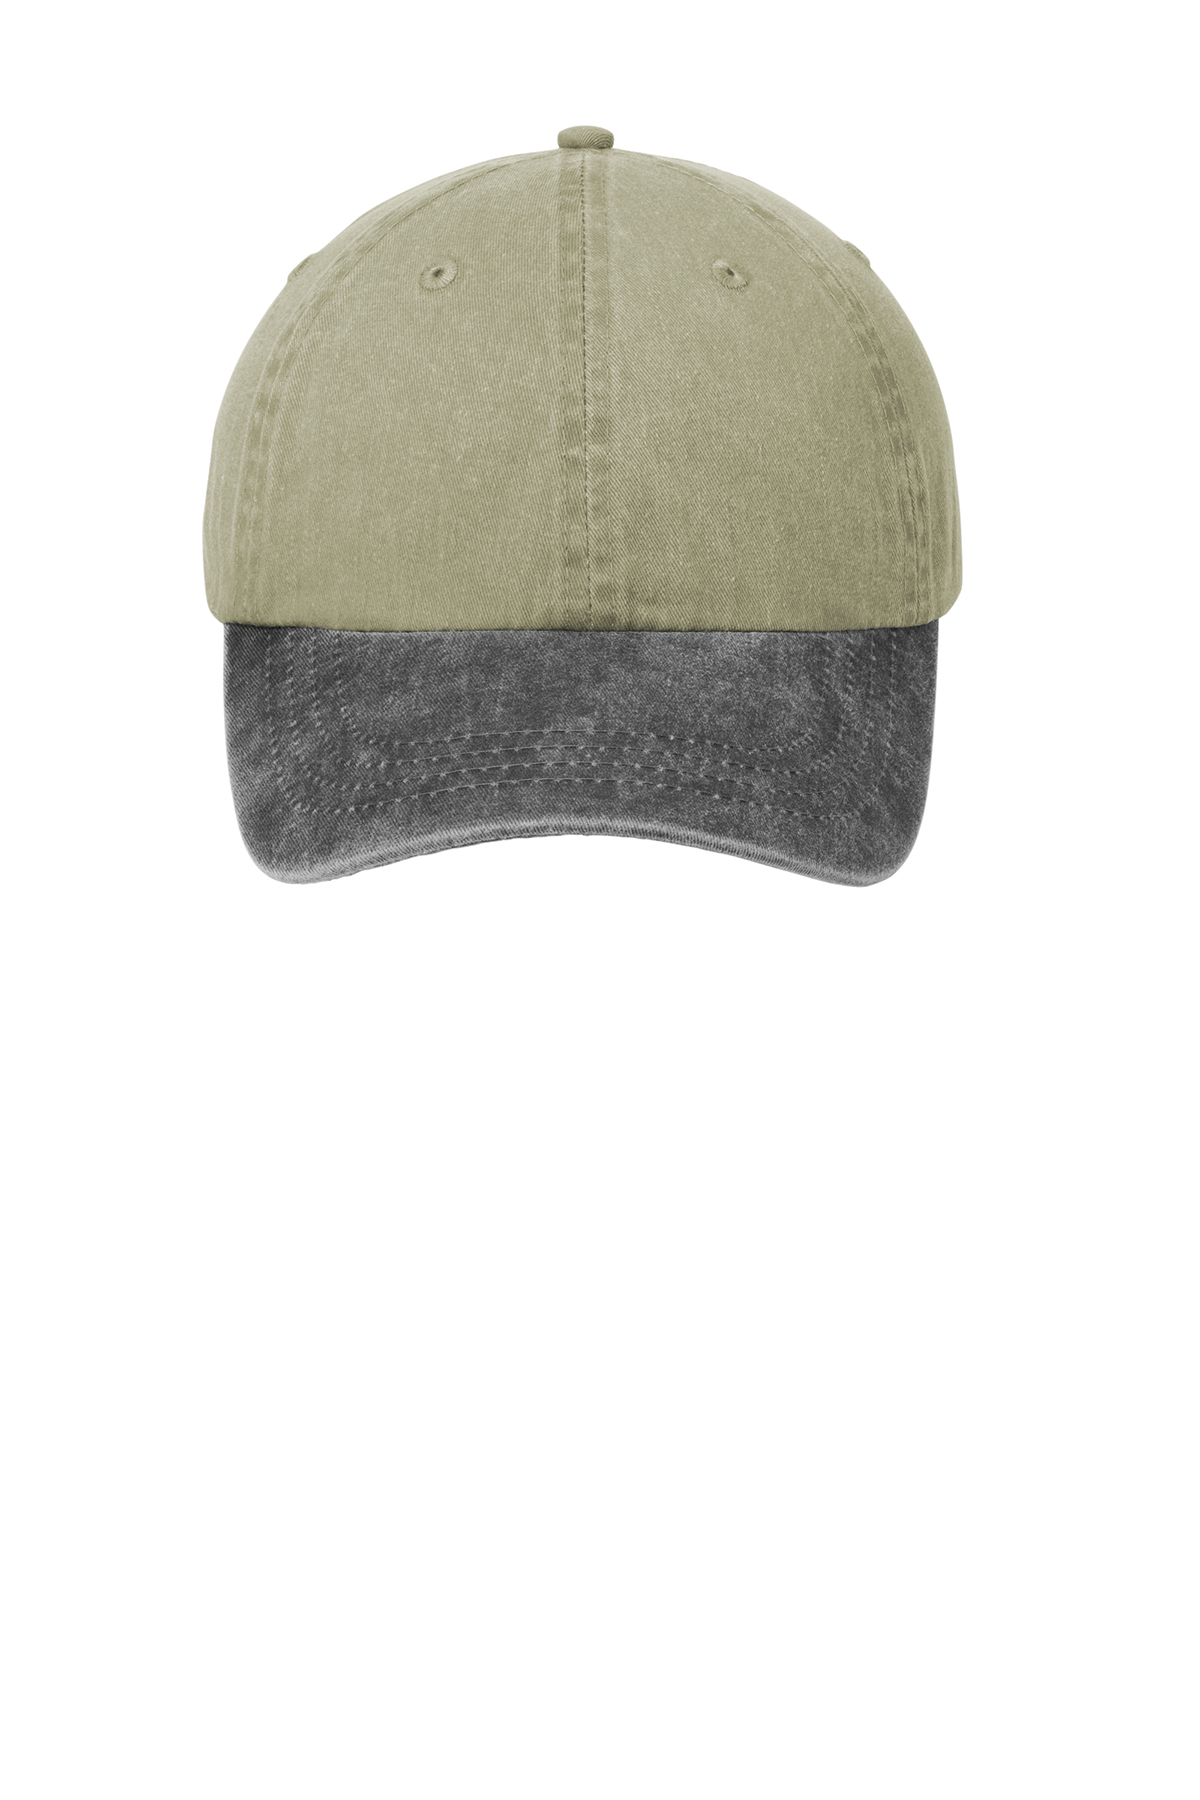 Port & Company -Two-Tone Pigment-Dyed Cap | Product | SanMar